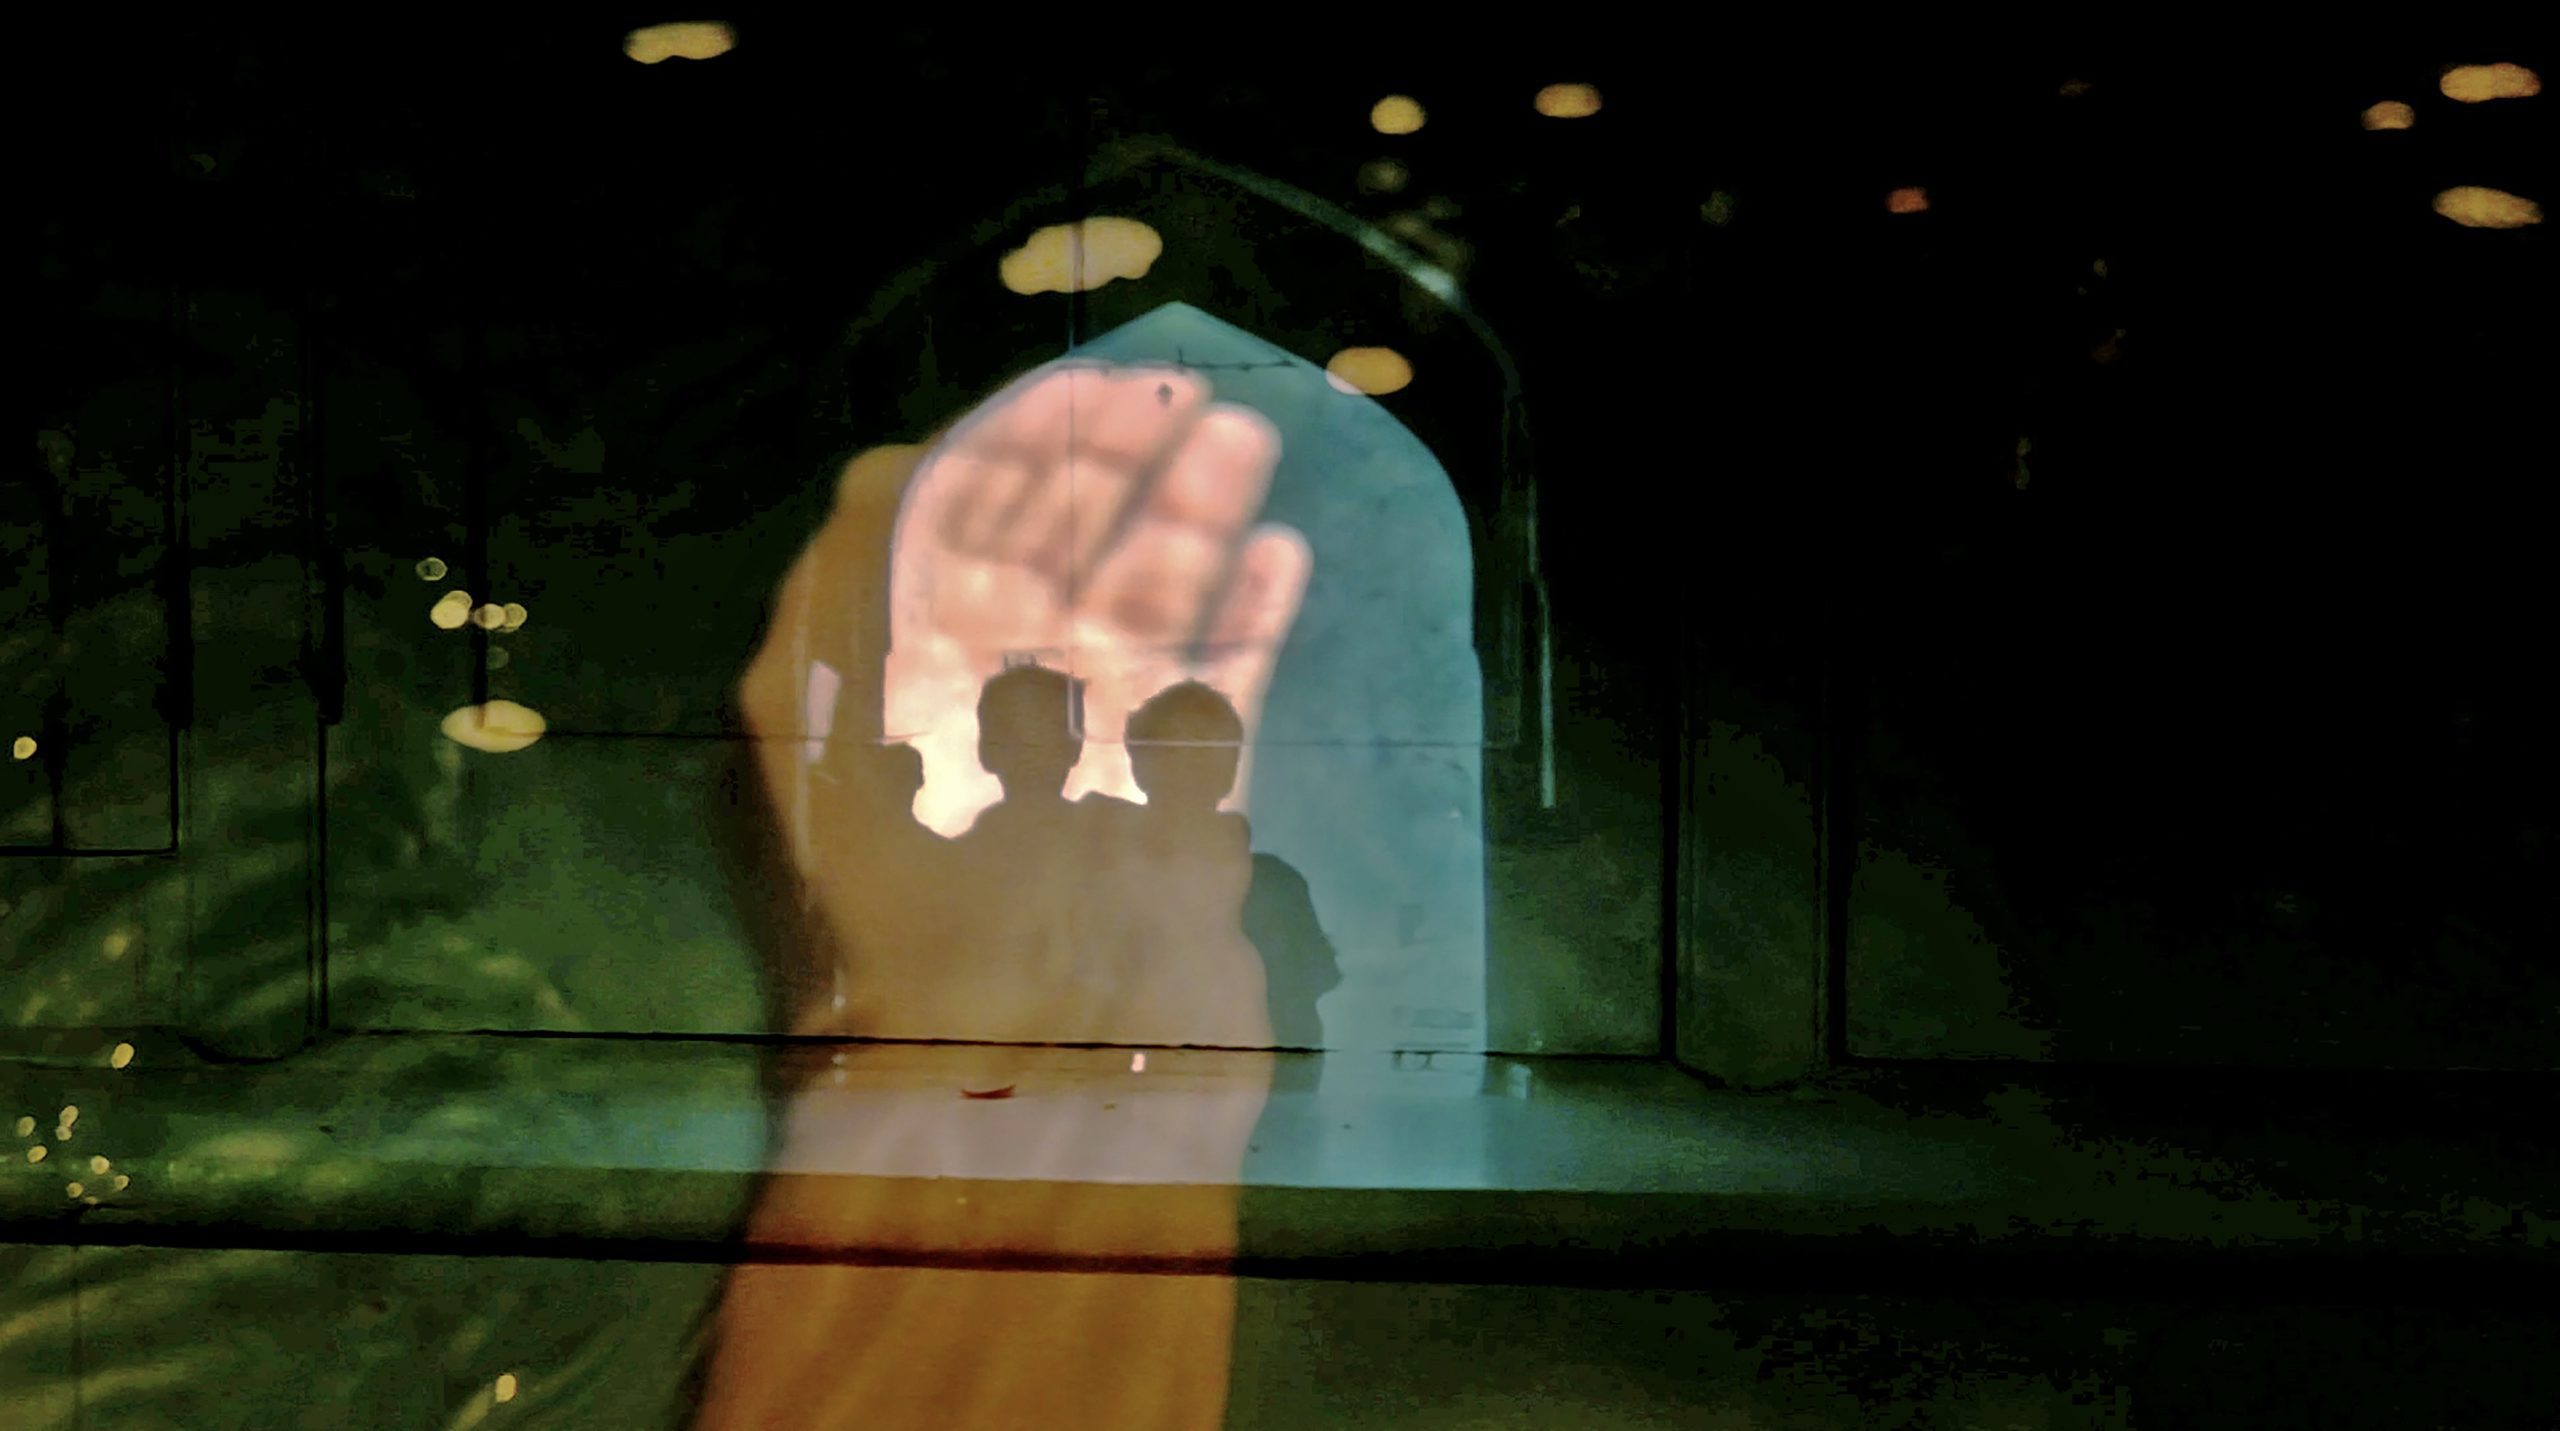 Kalpana Subramanian, Incantation (2021). A photograph depicting multiple images projected on a surface. The shadows of what look like two young people, arms on each other's shoulders, standing under an arched gateway to a historic building in Delhi, India. Upon this image is an extended hand, palm open. It looks like the young people are in the palm.